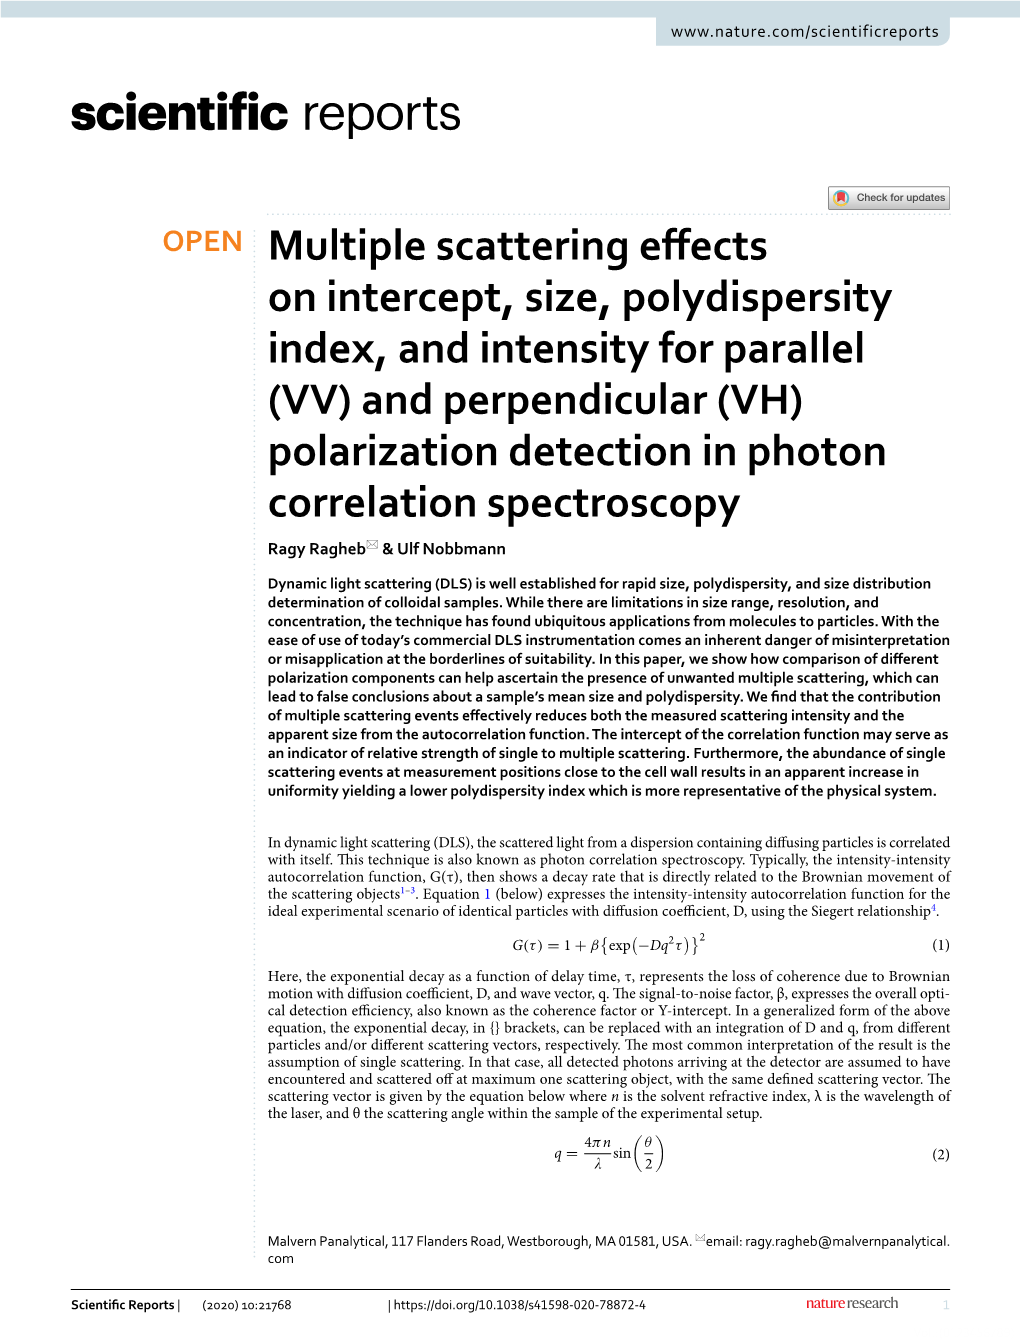 Multiple Scattering Effects on Intercept, Size, Polydispersity Index